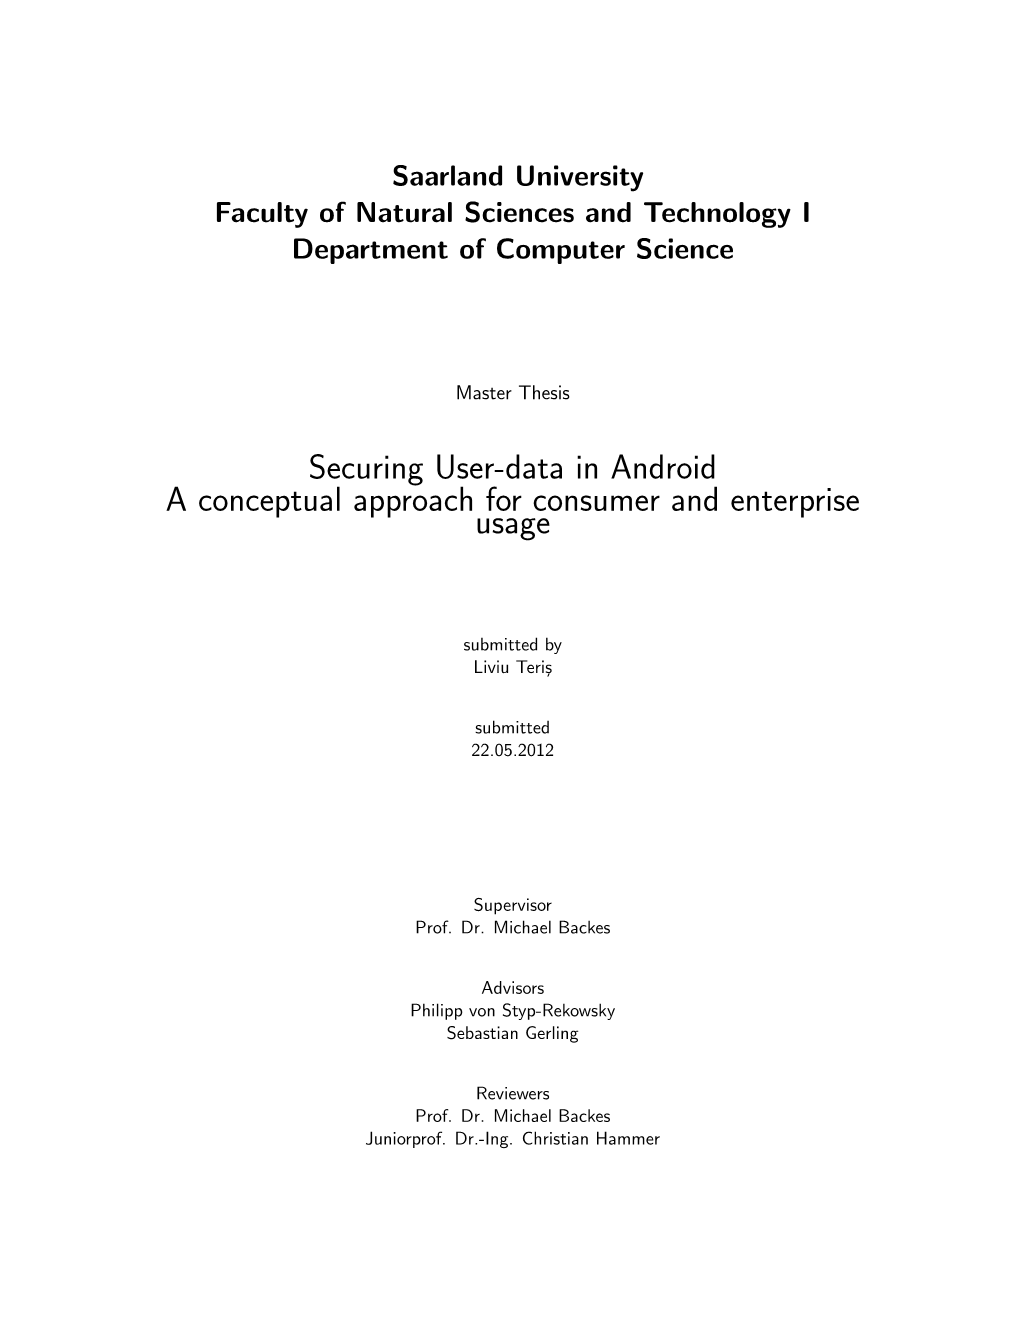 Securing User-Data in Android a Conceptual Approach for Consumer and Enterprise Usage